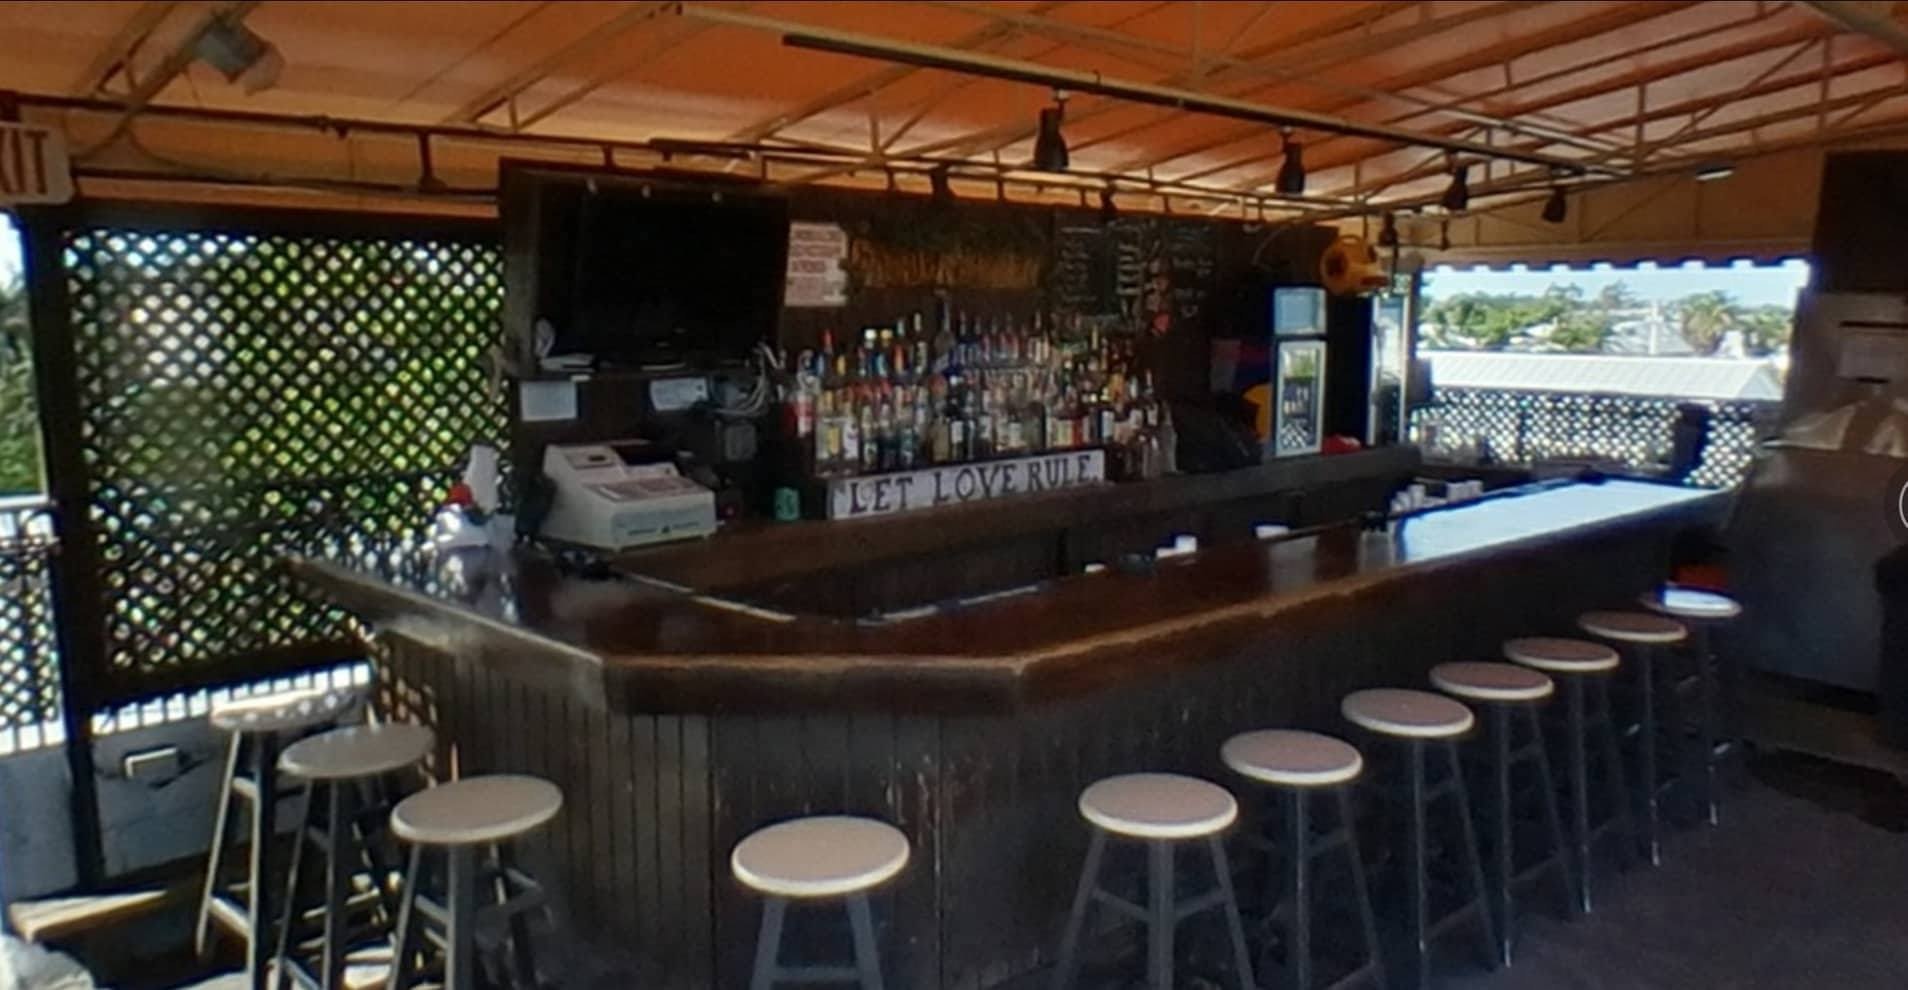 The wood-paneled bar at the Garden of Eden nudist resort is well-worn around the edges, with white stools and shaded by an orange awning. Behind the bar are colorful rows of liquor bottles, and a white shabby-chic sign that reads Let Love Rule